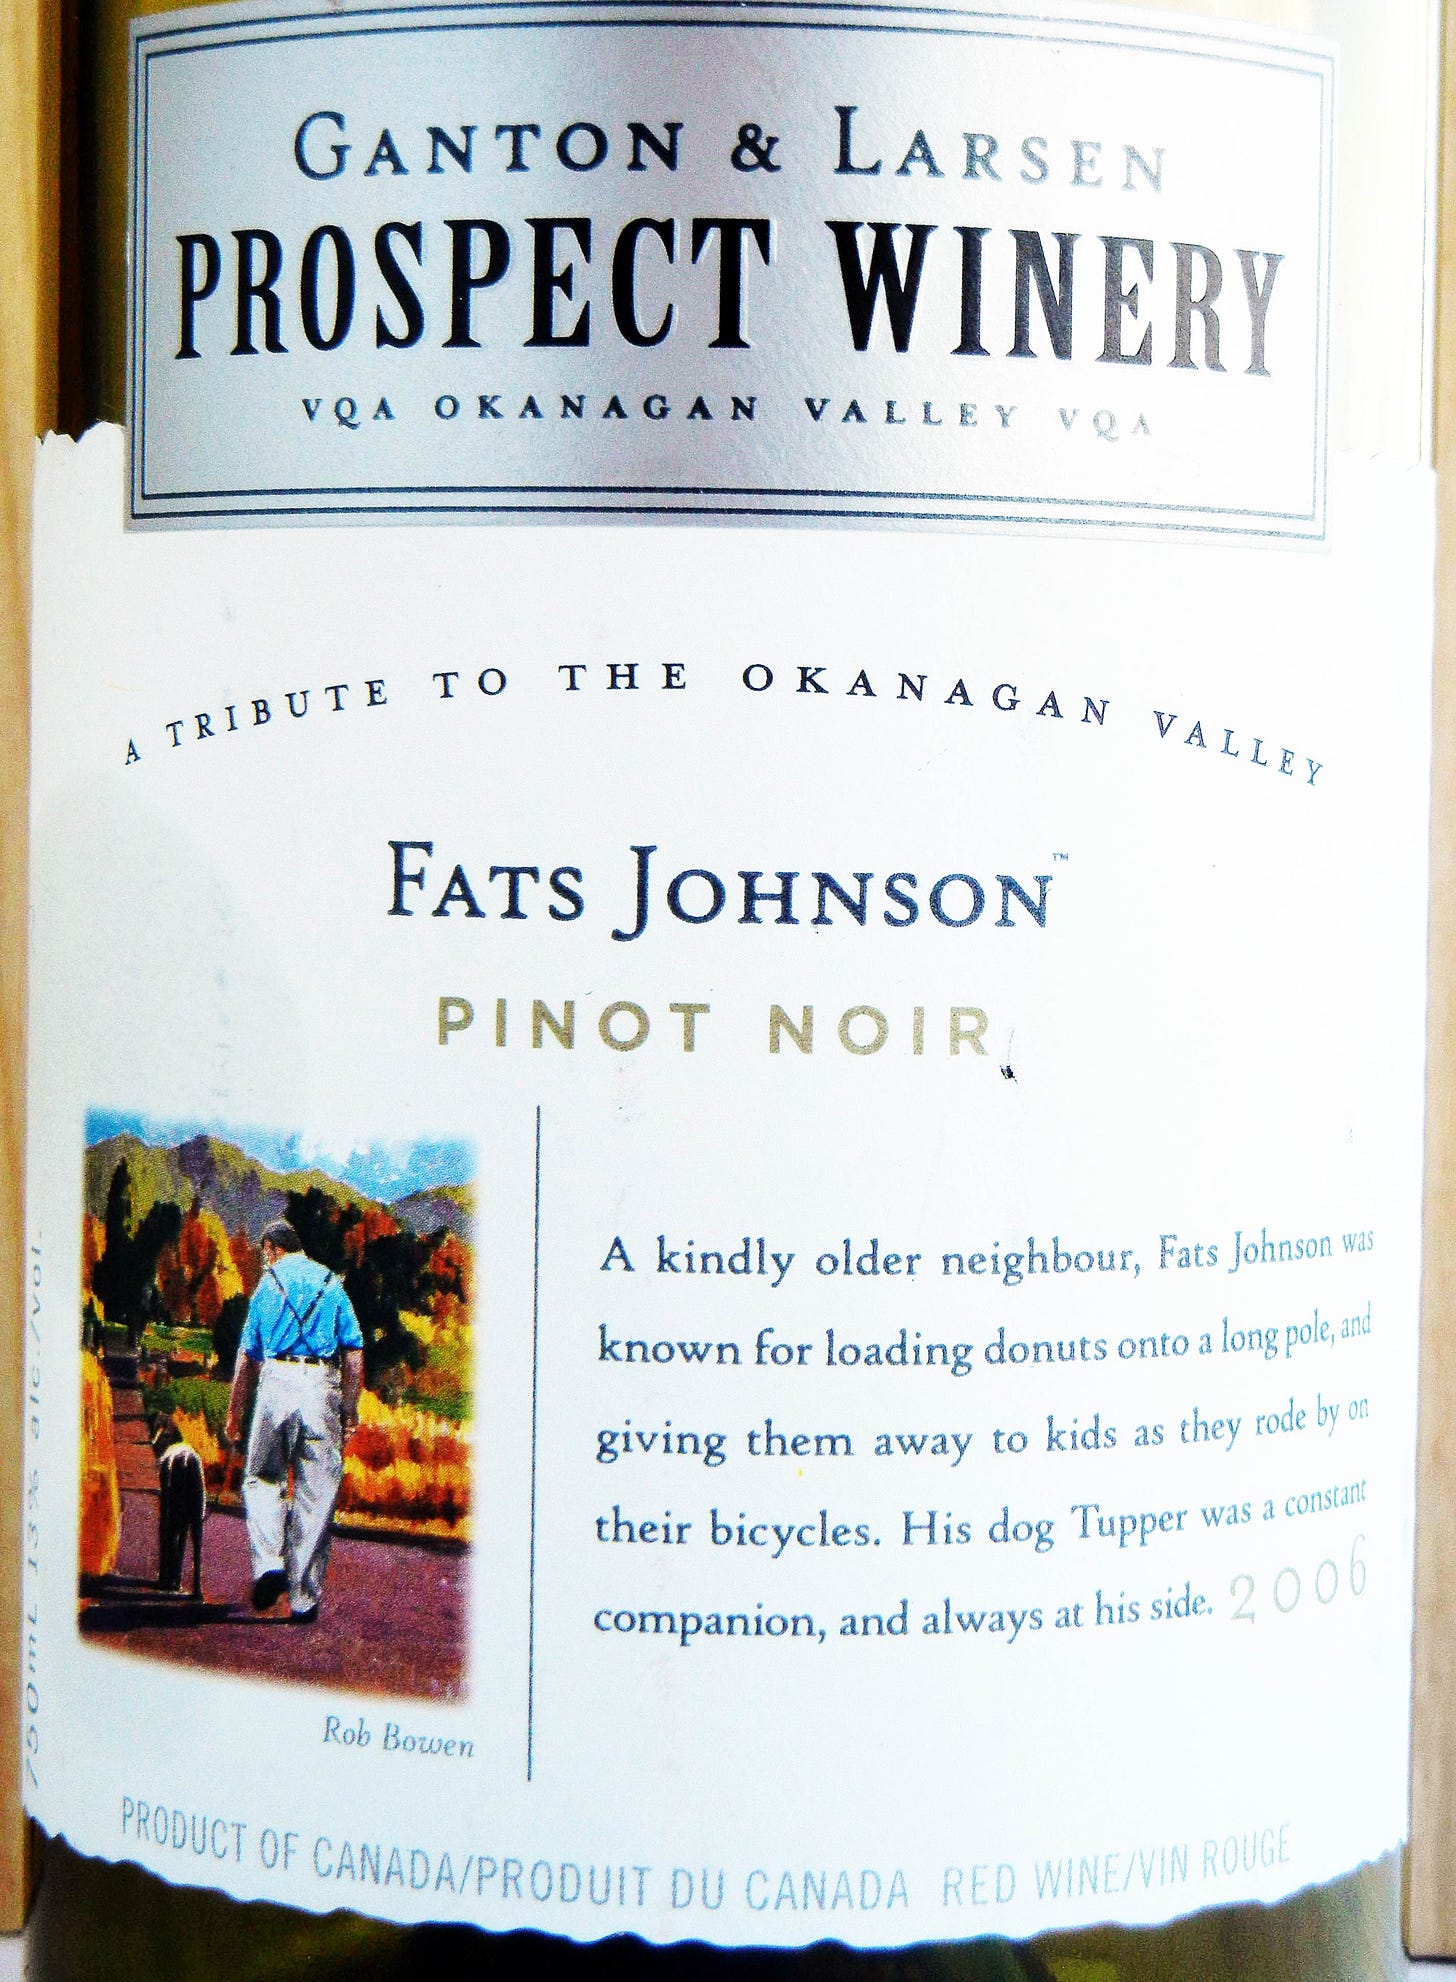 Prospect Winery Fats Johnson Pinot Noir 2006 Label - BC Pinot Noir Tasting Review 12